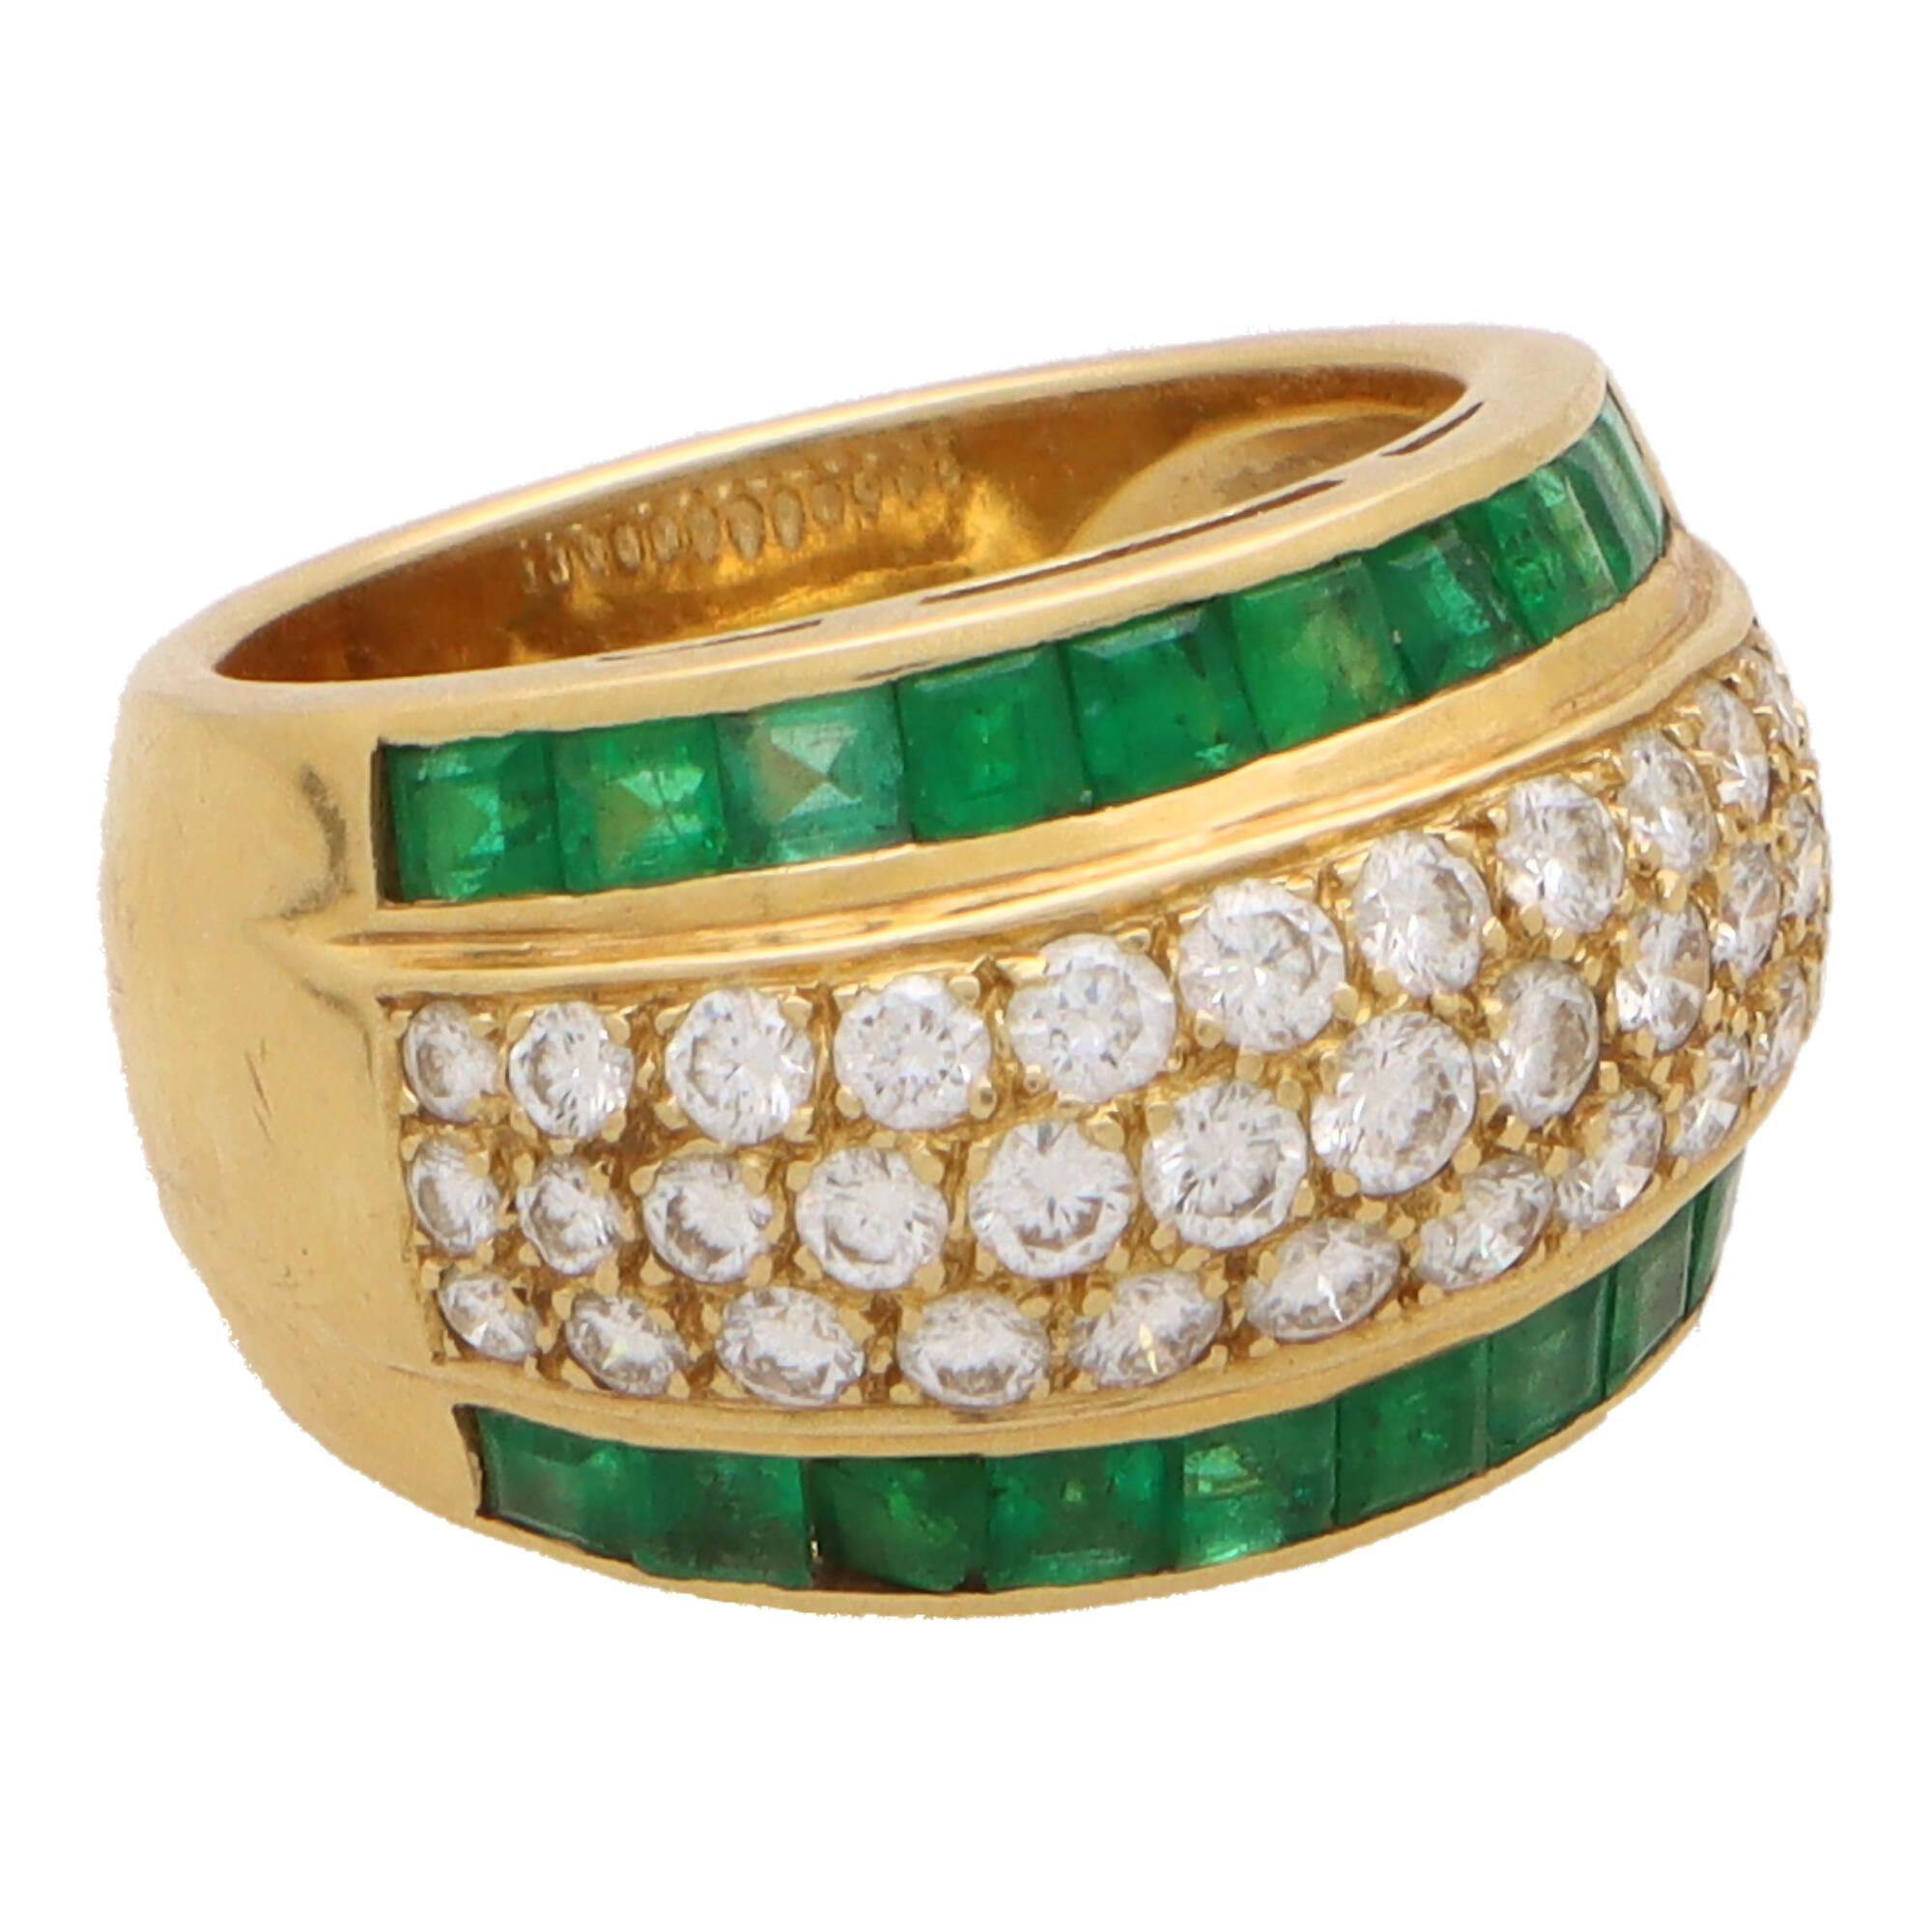  A beautiful vintage 1970's emerald and diamond bombe ring set in 18k yellow gold.

The ring is composed in an iconic 70's bombe design, set centrally with a pave set diamond panel and bordered to each side with calibre cut emeralds. The design is